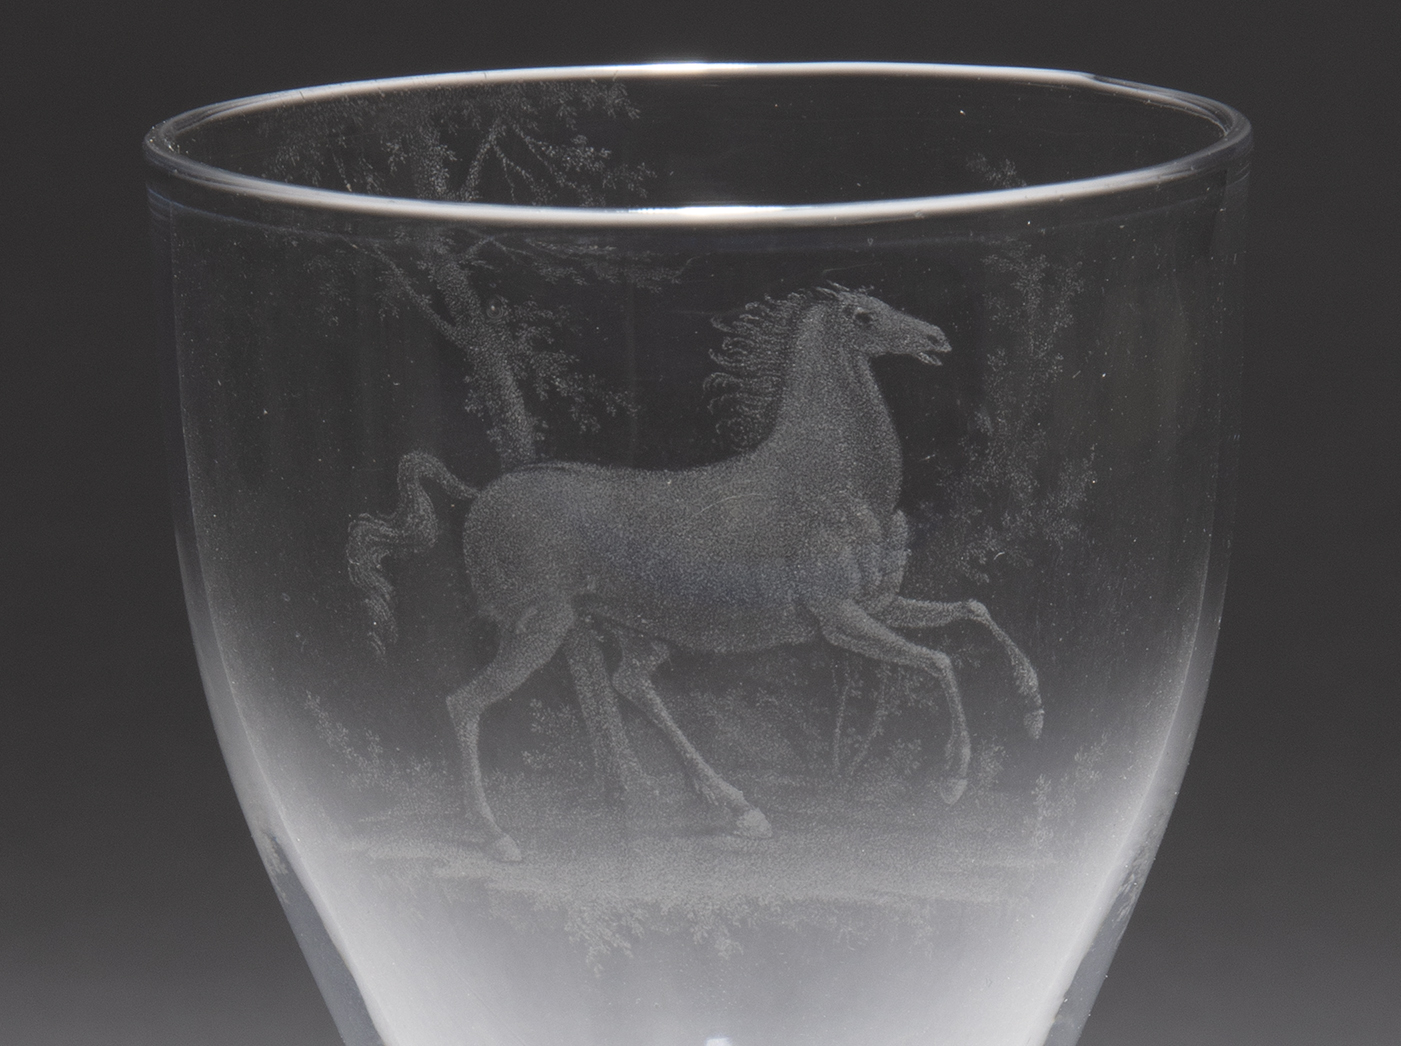 Close-up photograph of the vessel portion of a drinking glass with an image of a horse engraved into its surface.